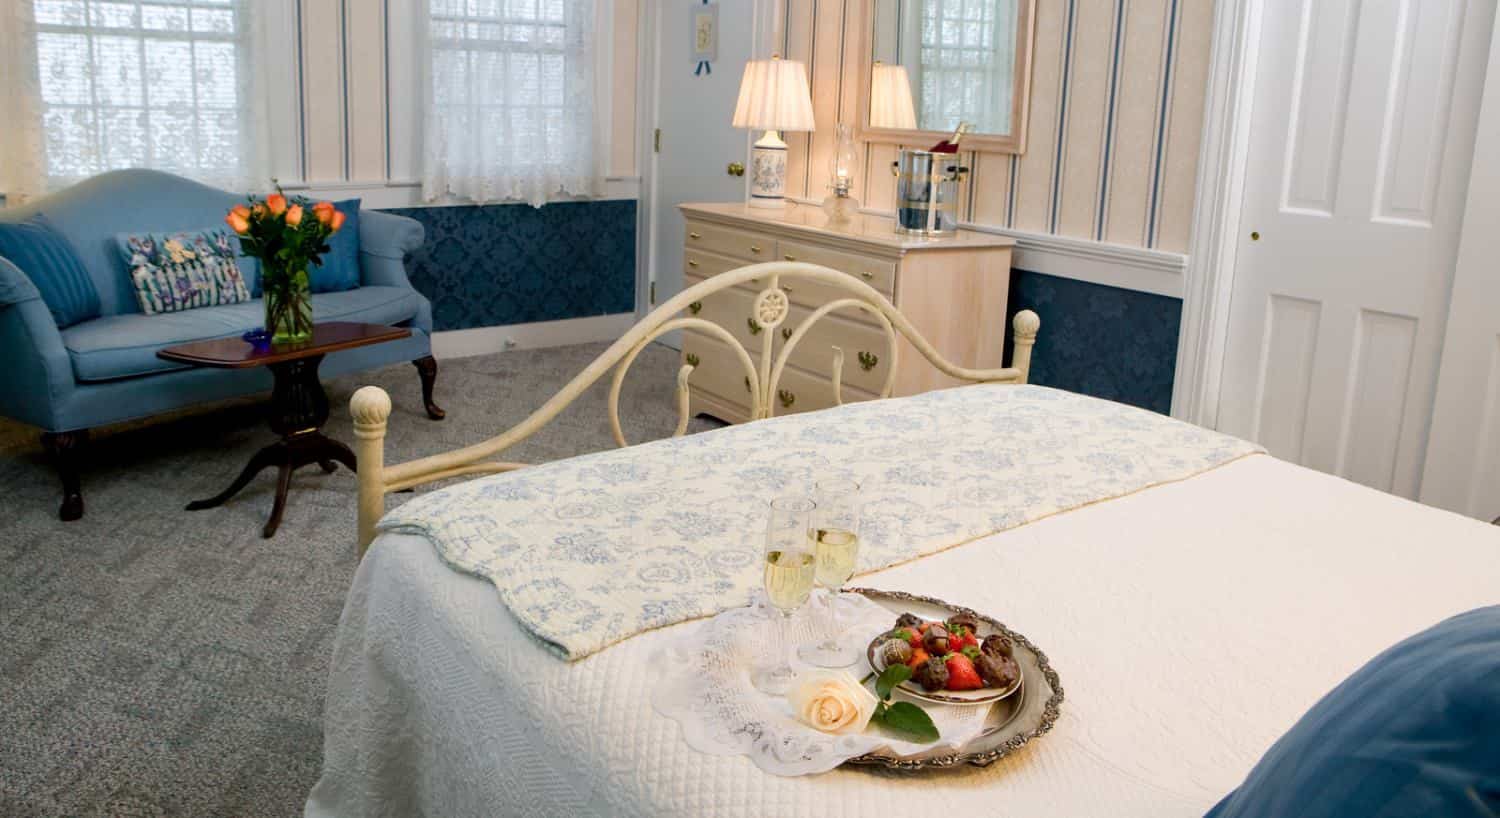 Bedroom suite with gray carpeting, cream and blue striped wallpaper, blue brocade wallpaper below chair rail, cream wrought iron bed, white bedding, and sitting area